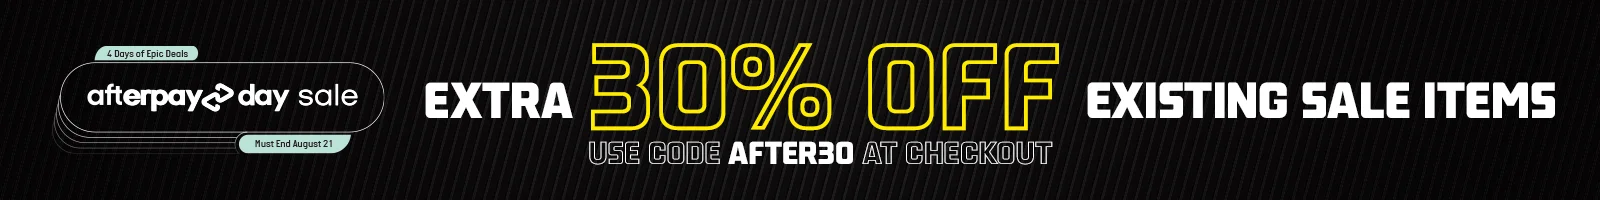 Extra 30% OFF on sale items at Foot Locker with coupon